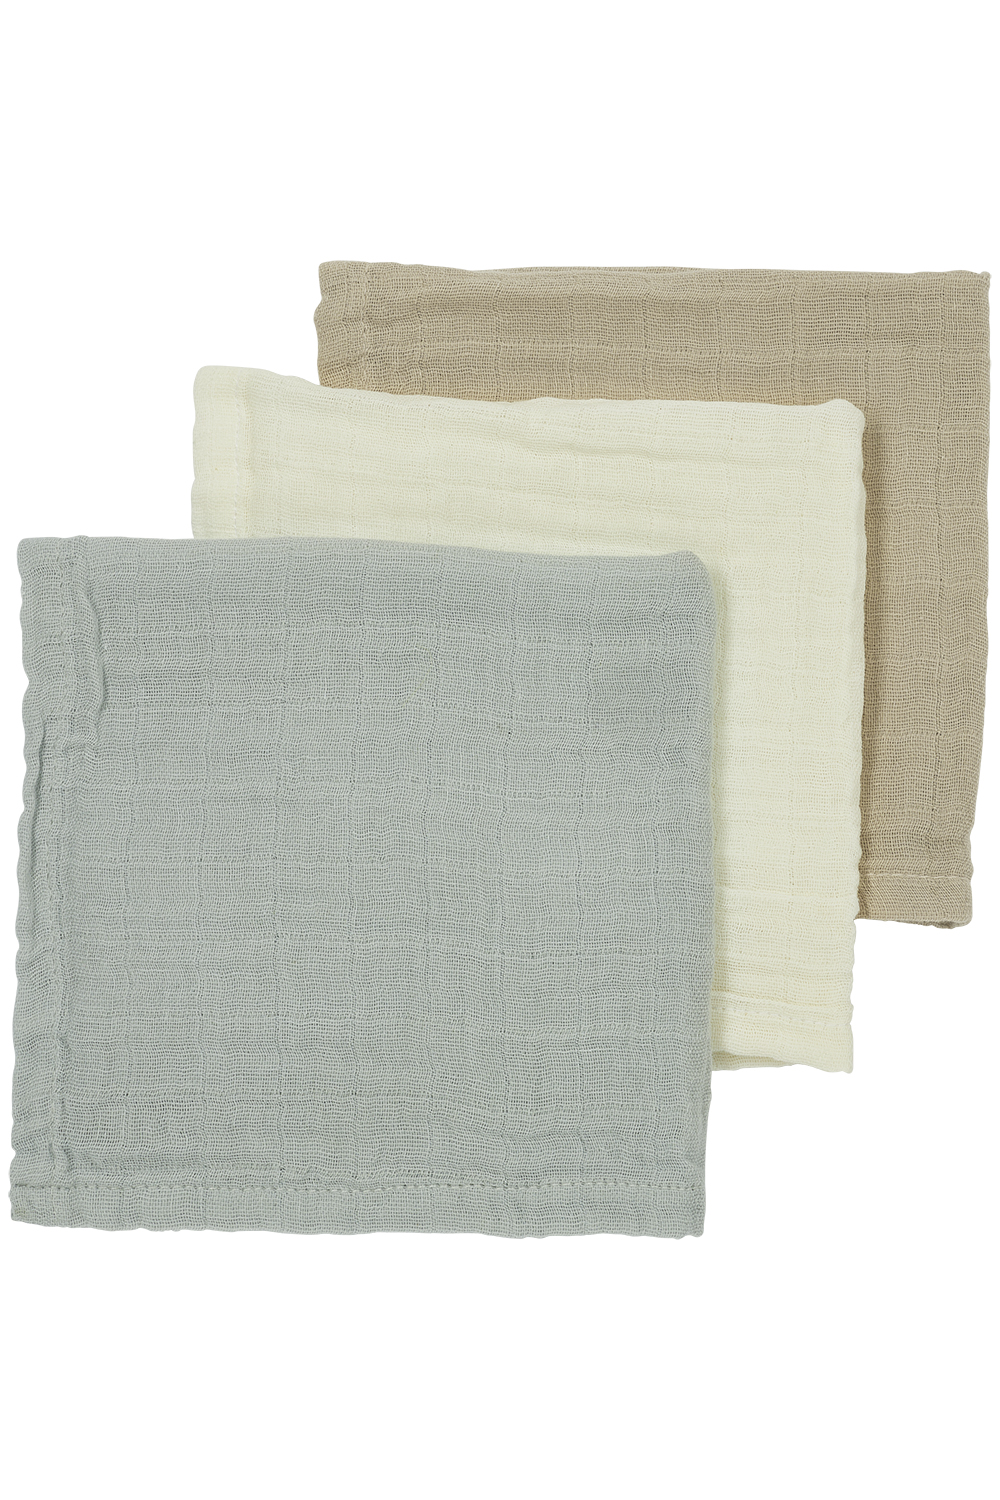 Facecloth 3-pack pre-washed muslin Uni - offwhite/light grey/sand - 30x30cm